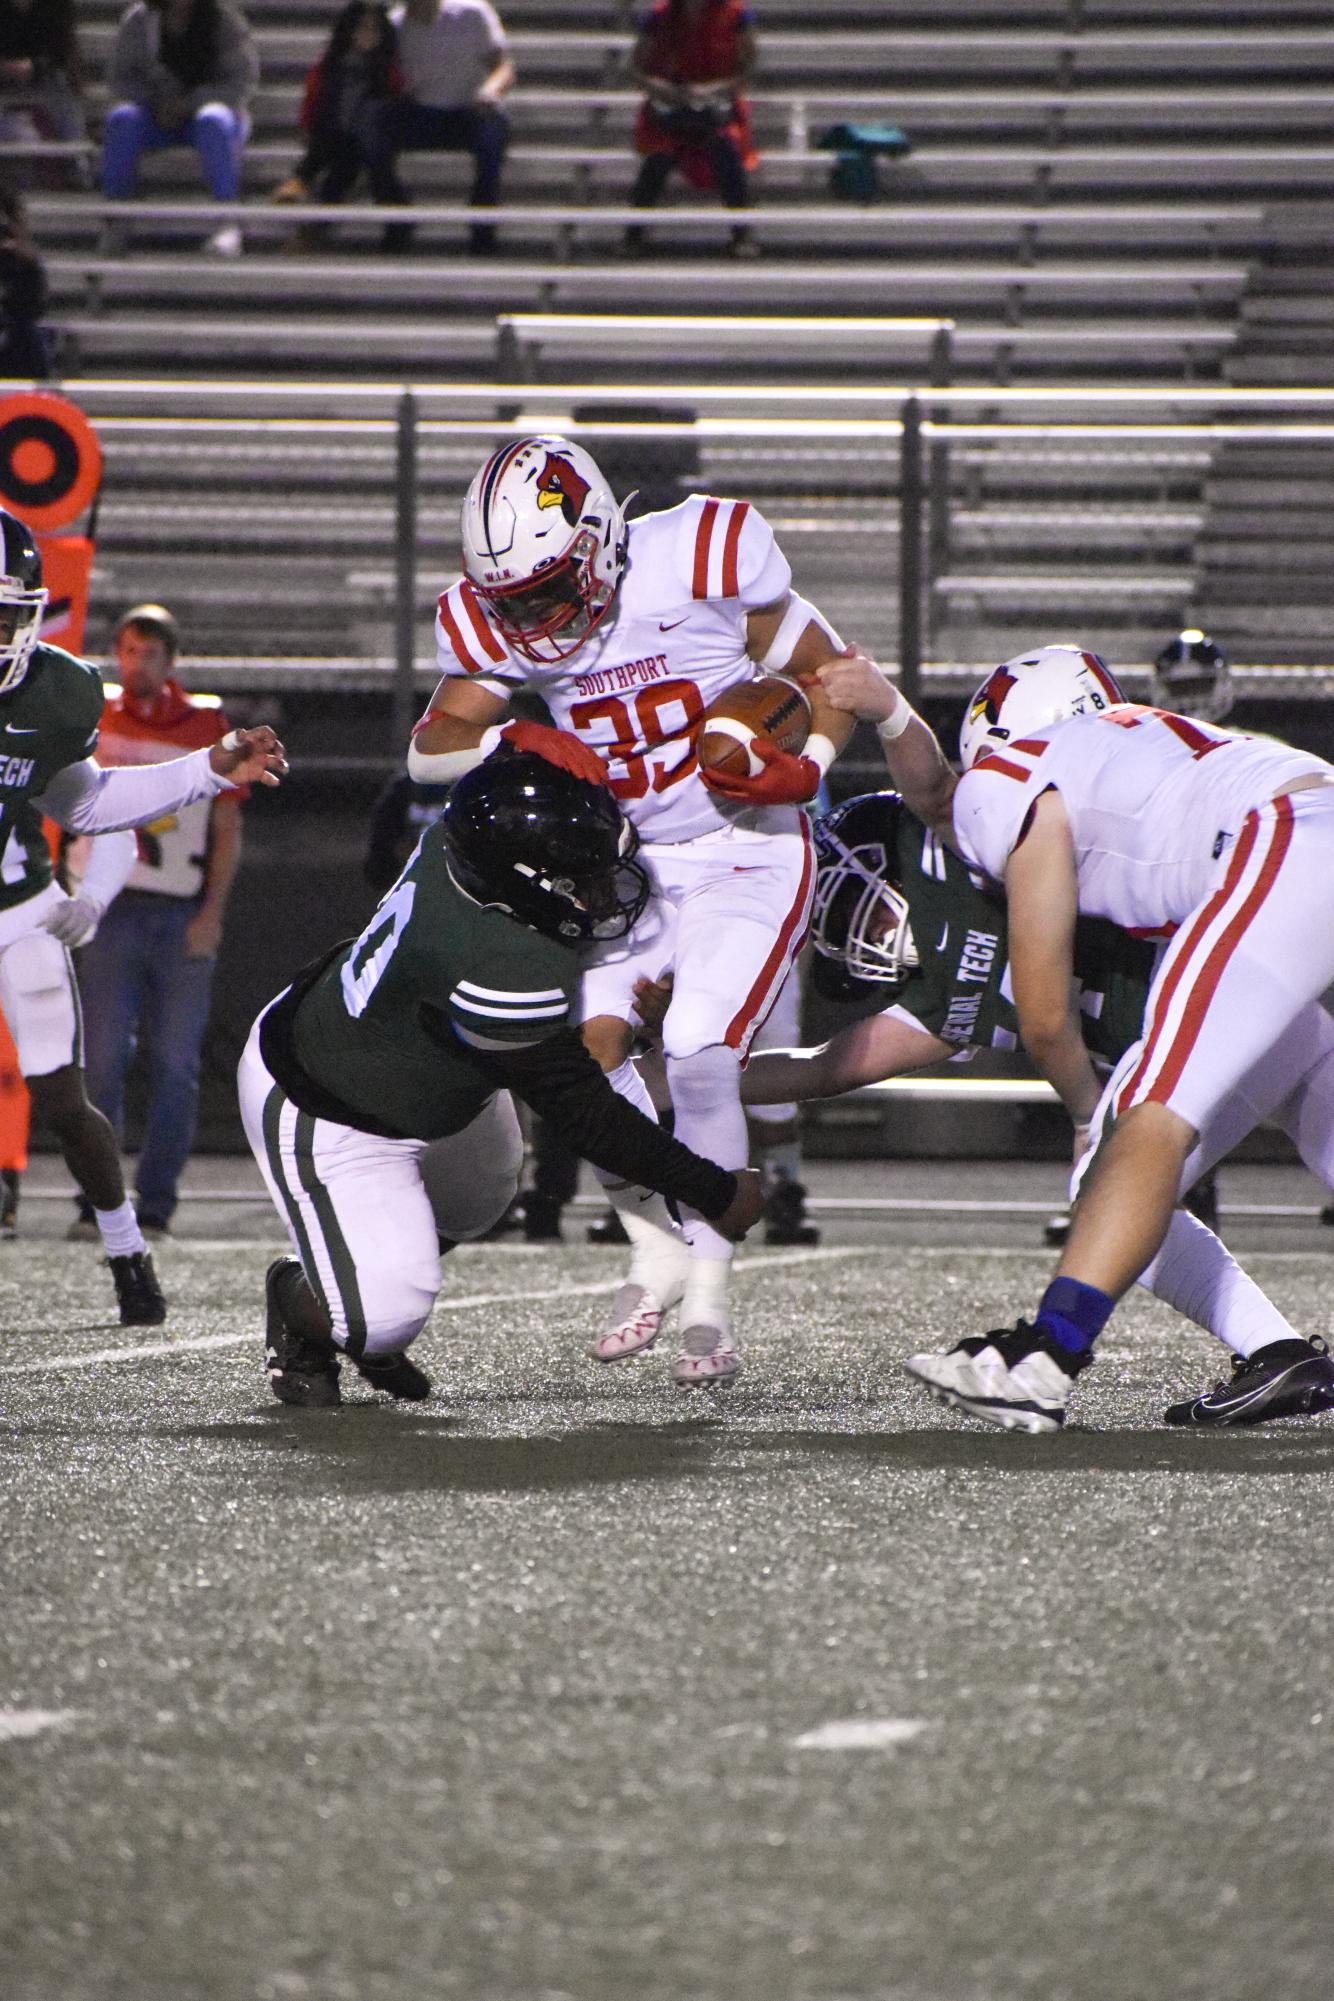 Sophomore Riley Matlock attempts to avoid a tackle against Techs defense.